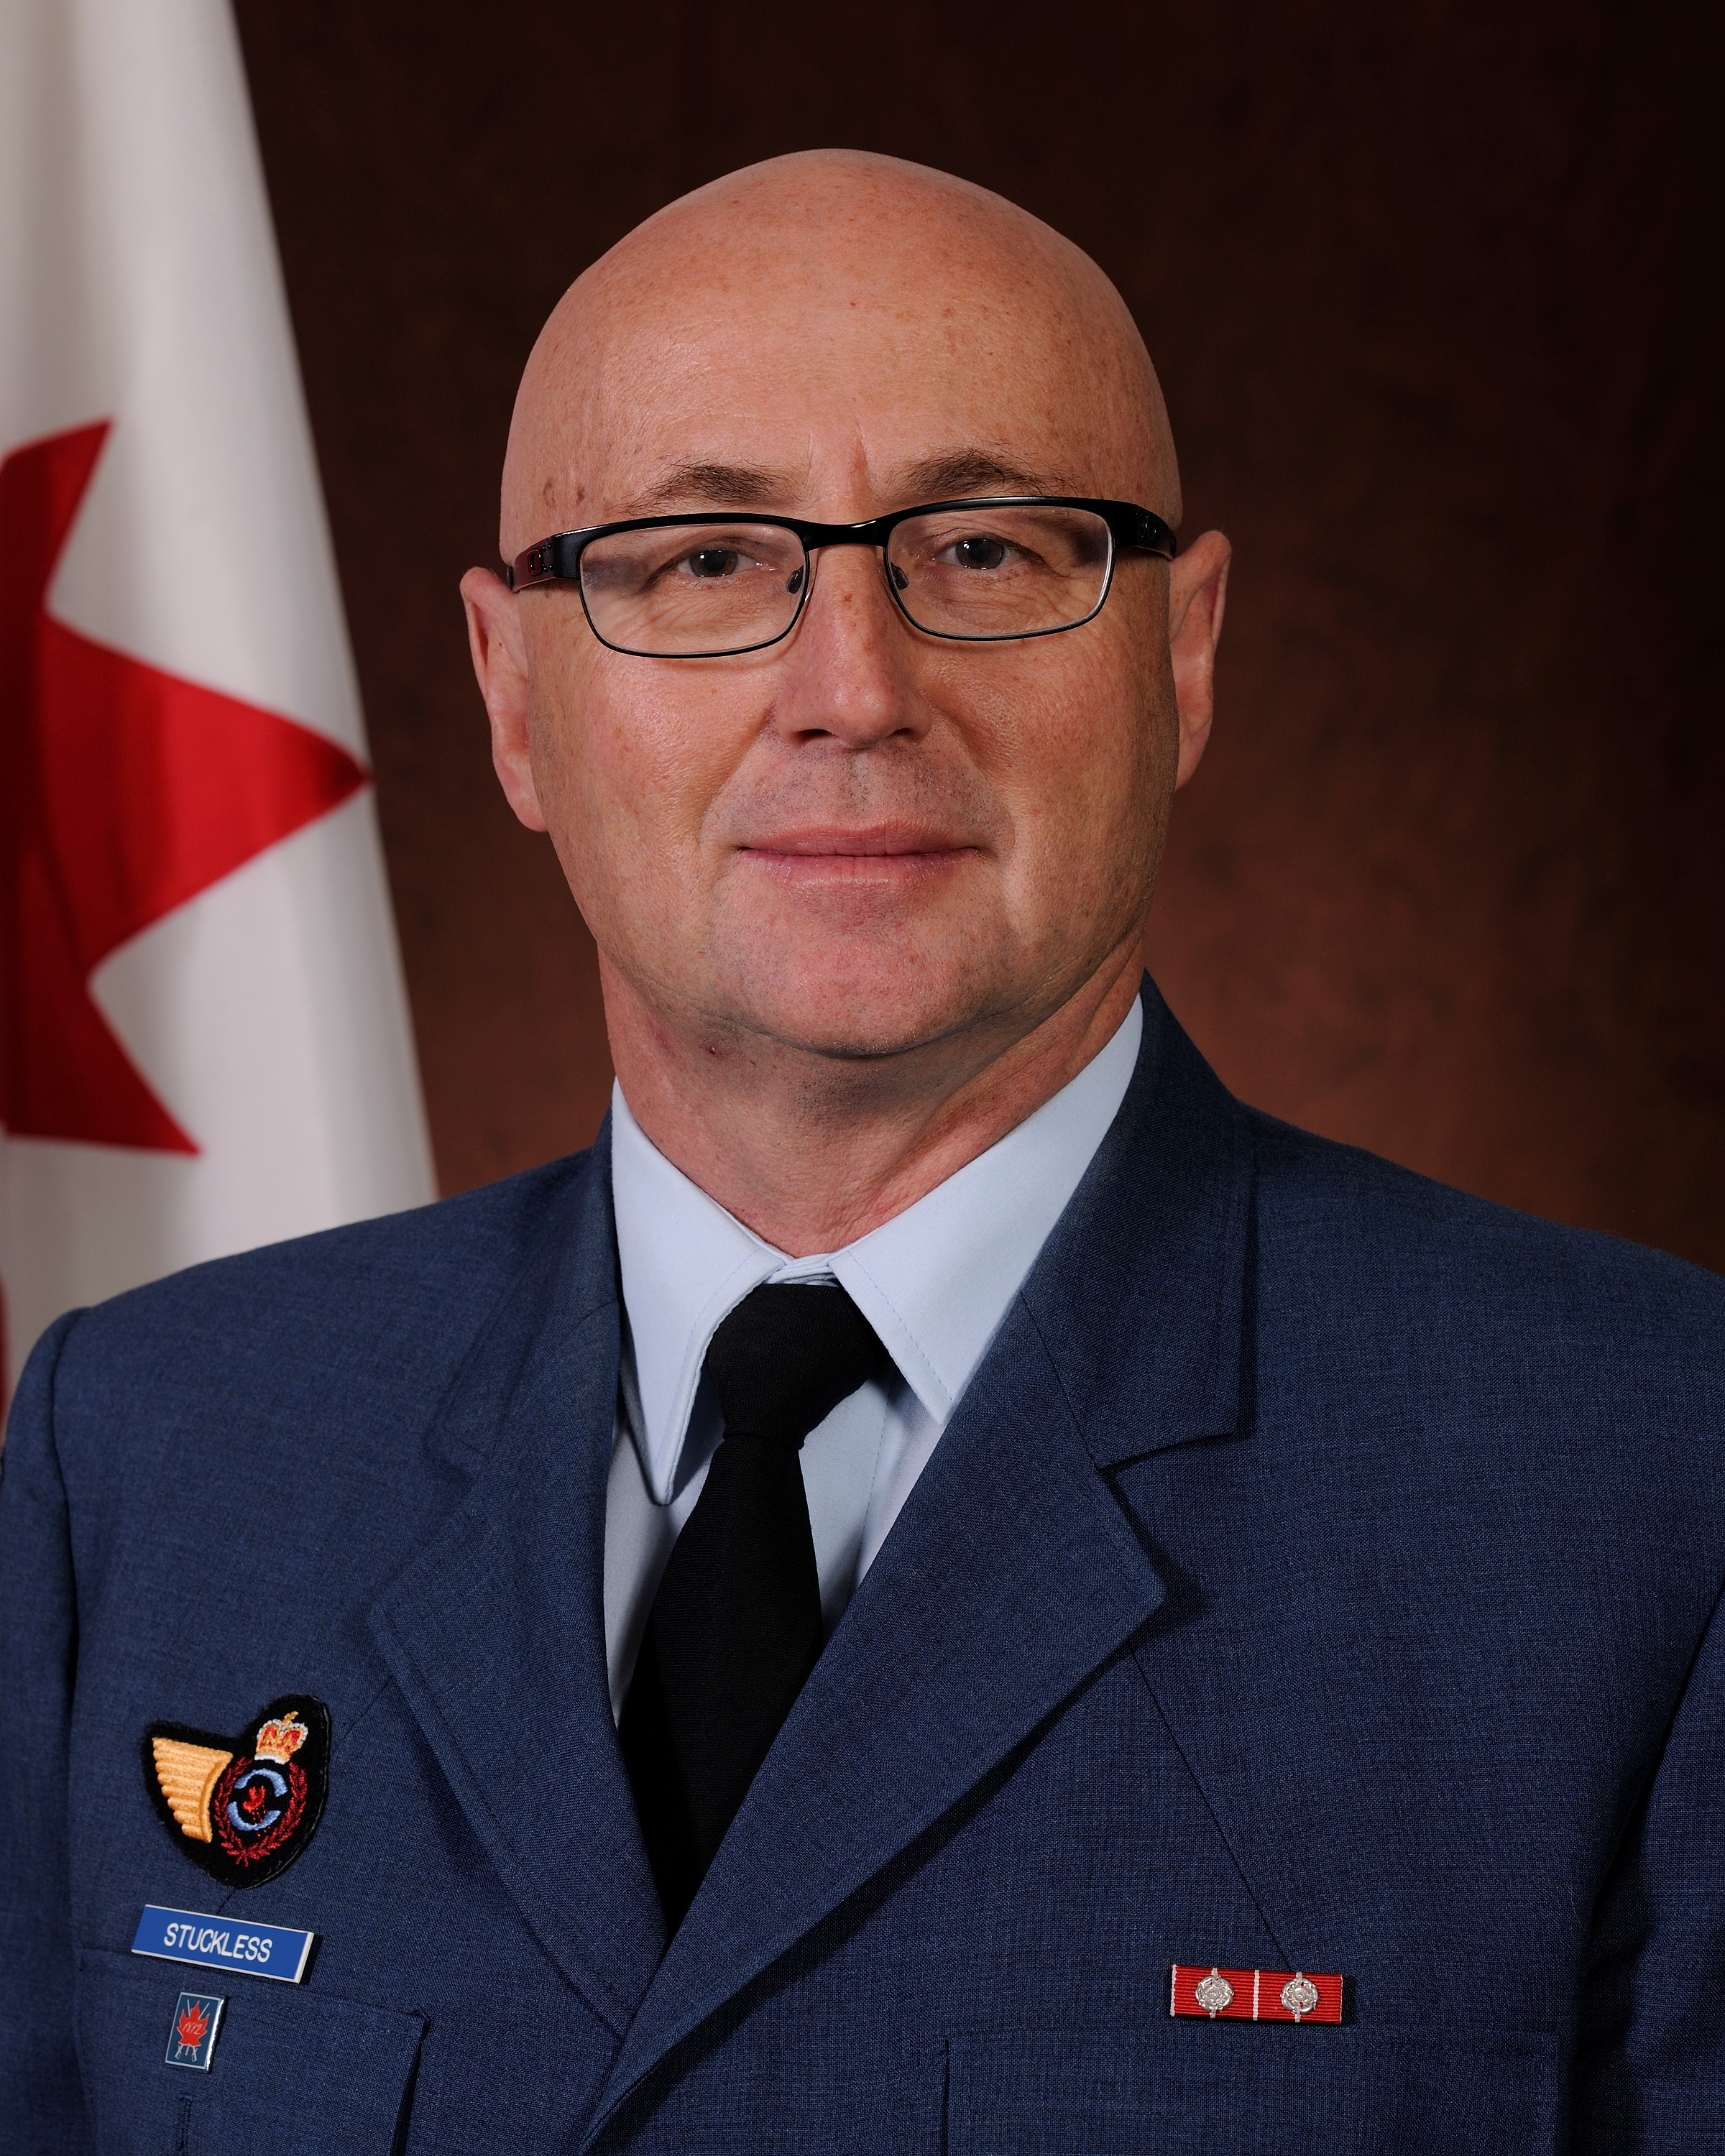 Chief Warrant Officer (Retired) Tony Stuckless